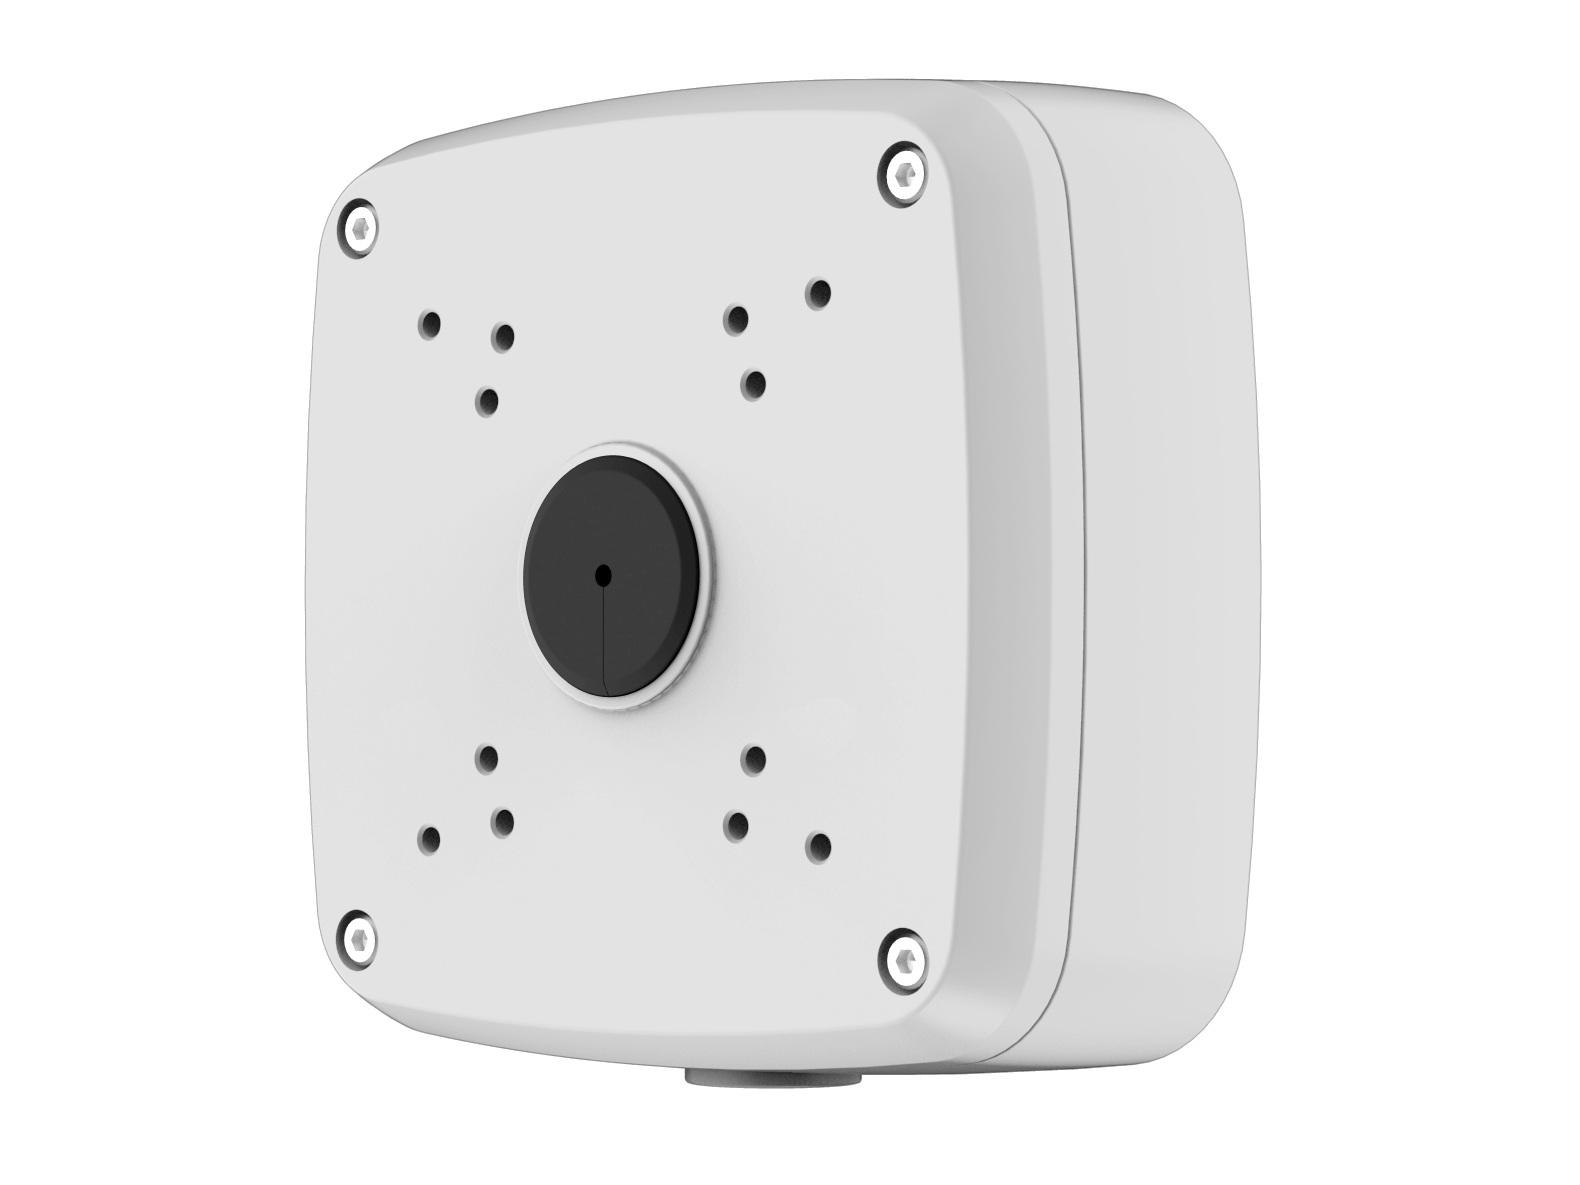 ICRealtime MNT-JUNCTION BOX 4 Square Junction Box For Ip Base Bullet Cameras